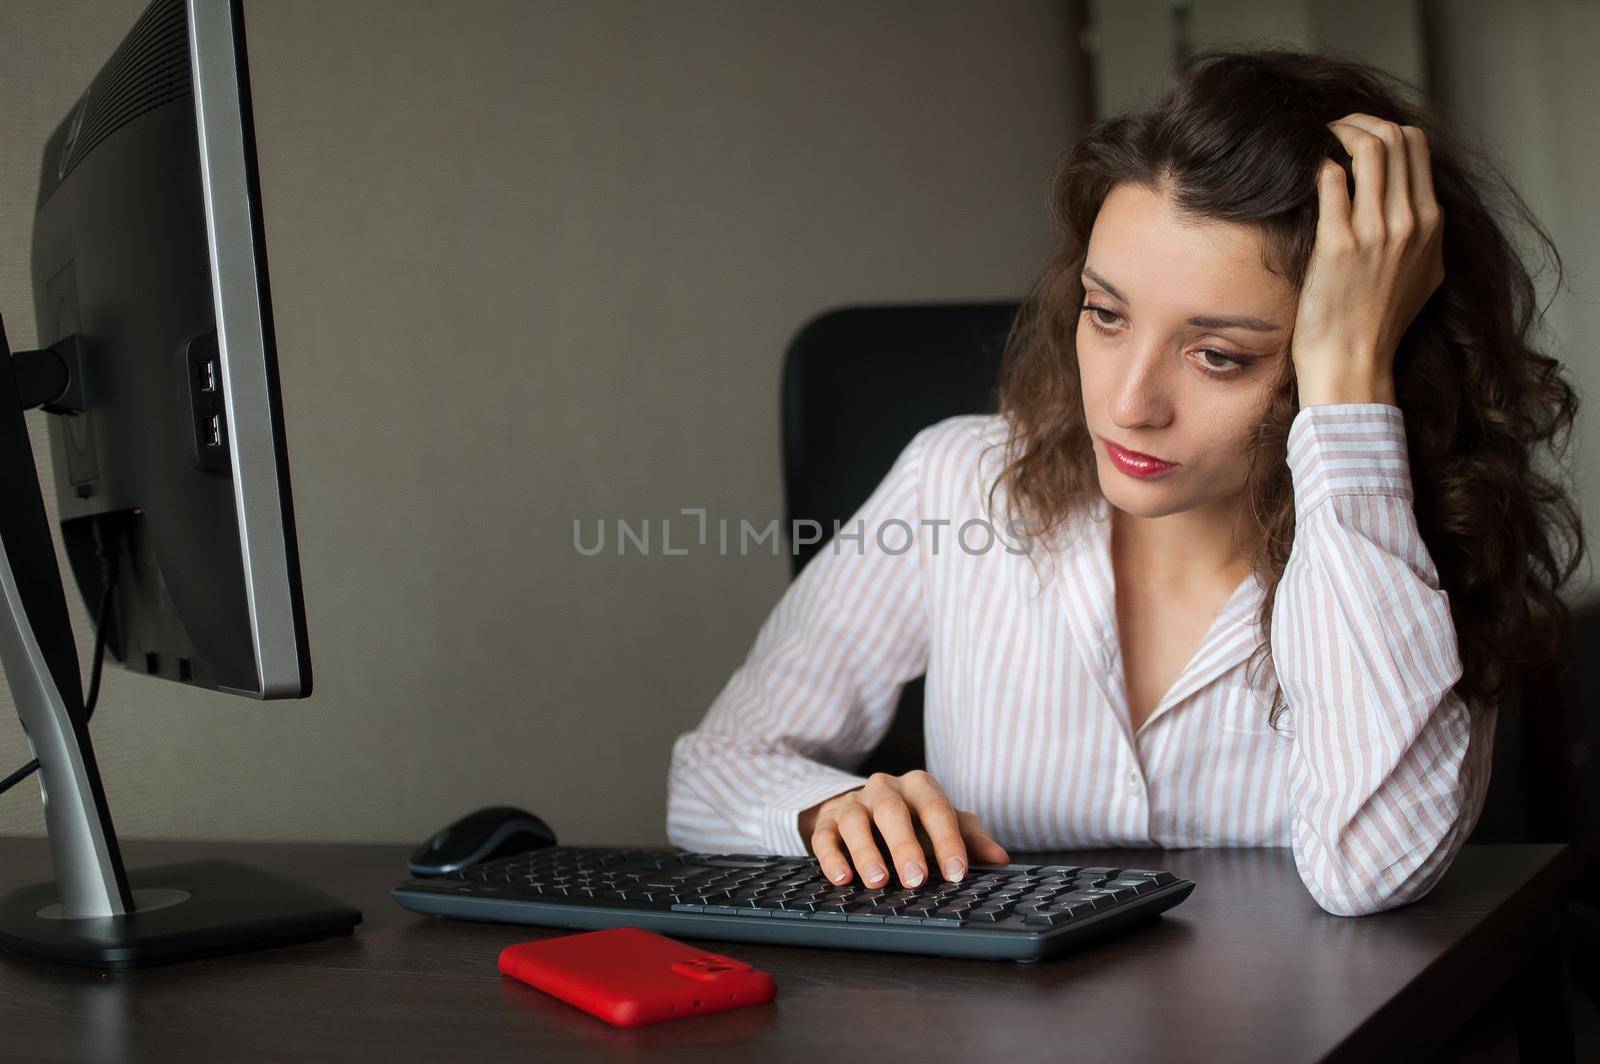 Tired young woman with curly hair and white shirt is working at the office using her laptop, routine work, freelance, burnout syndrome.